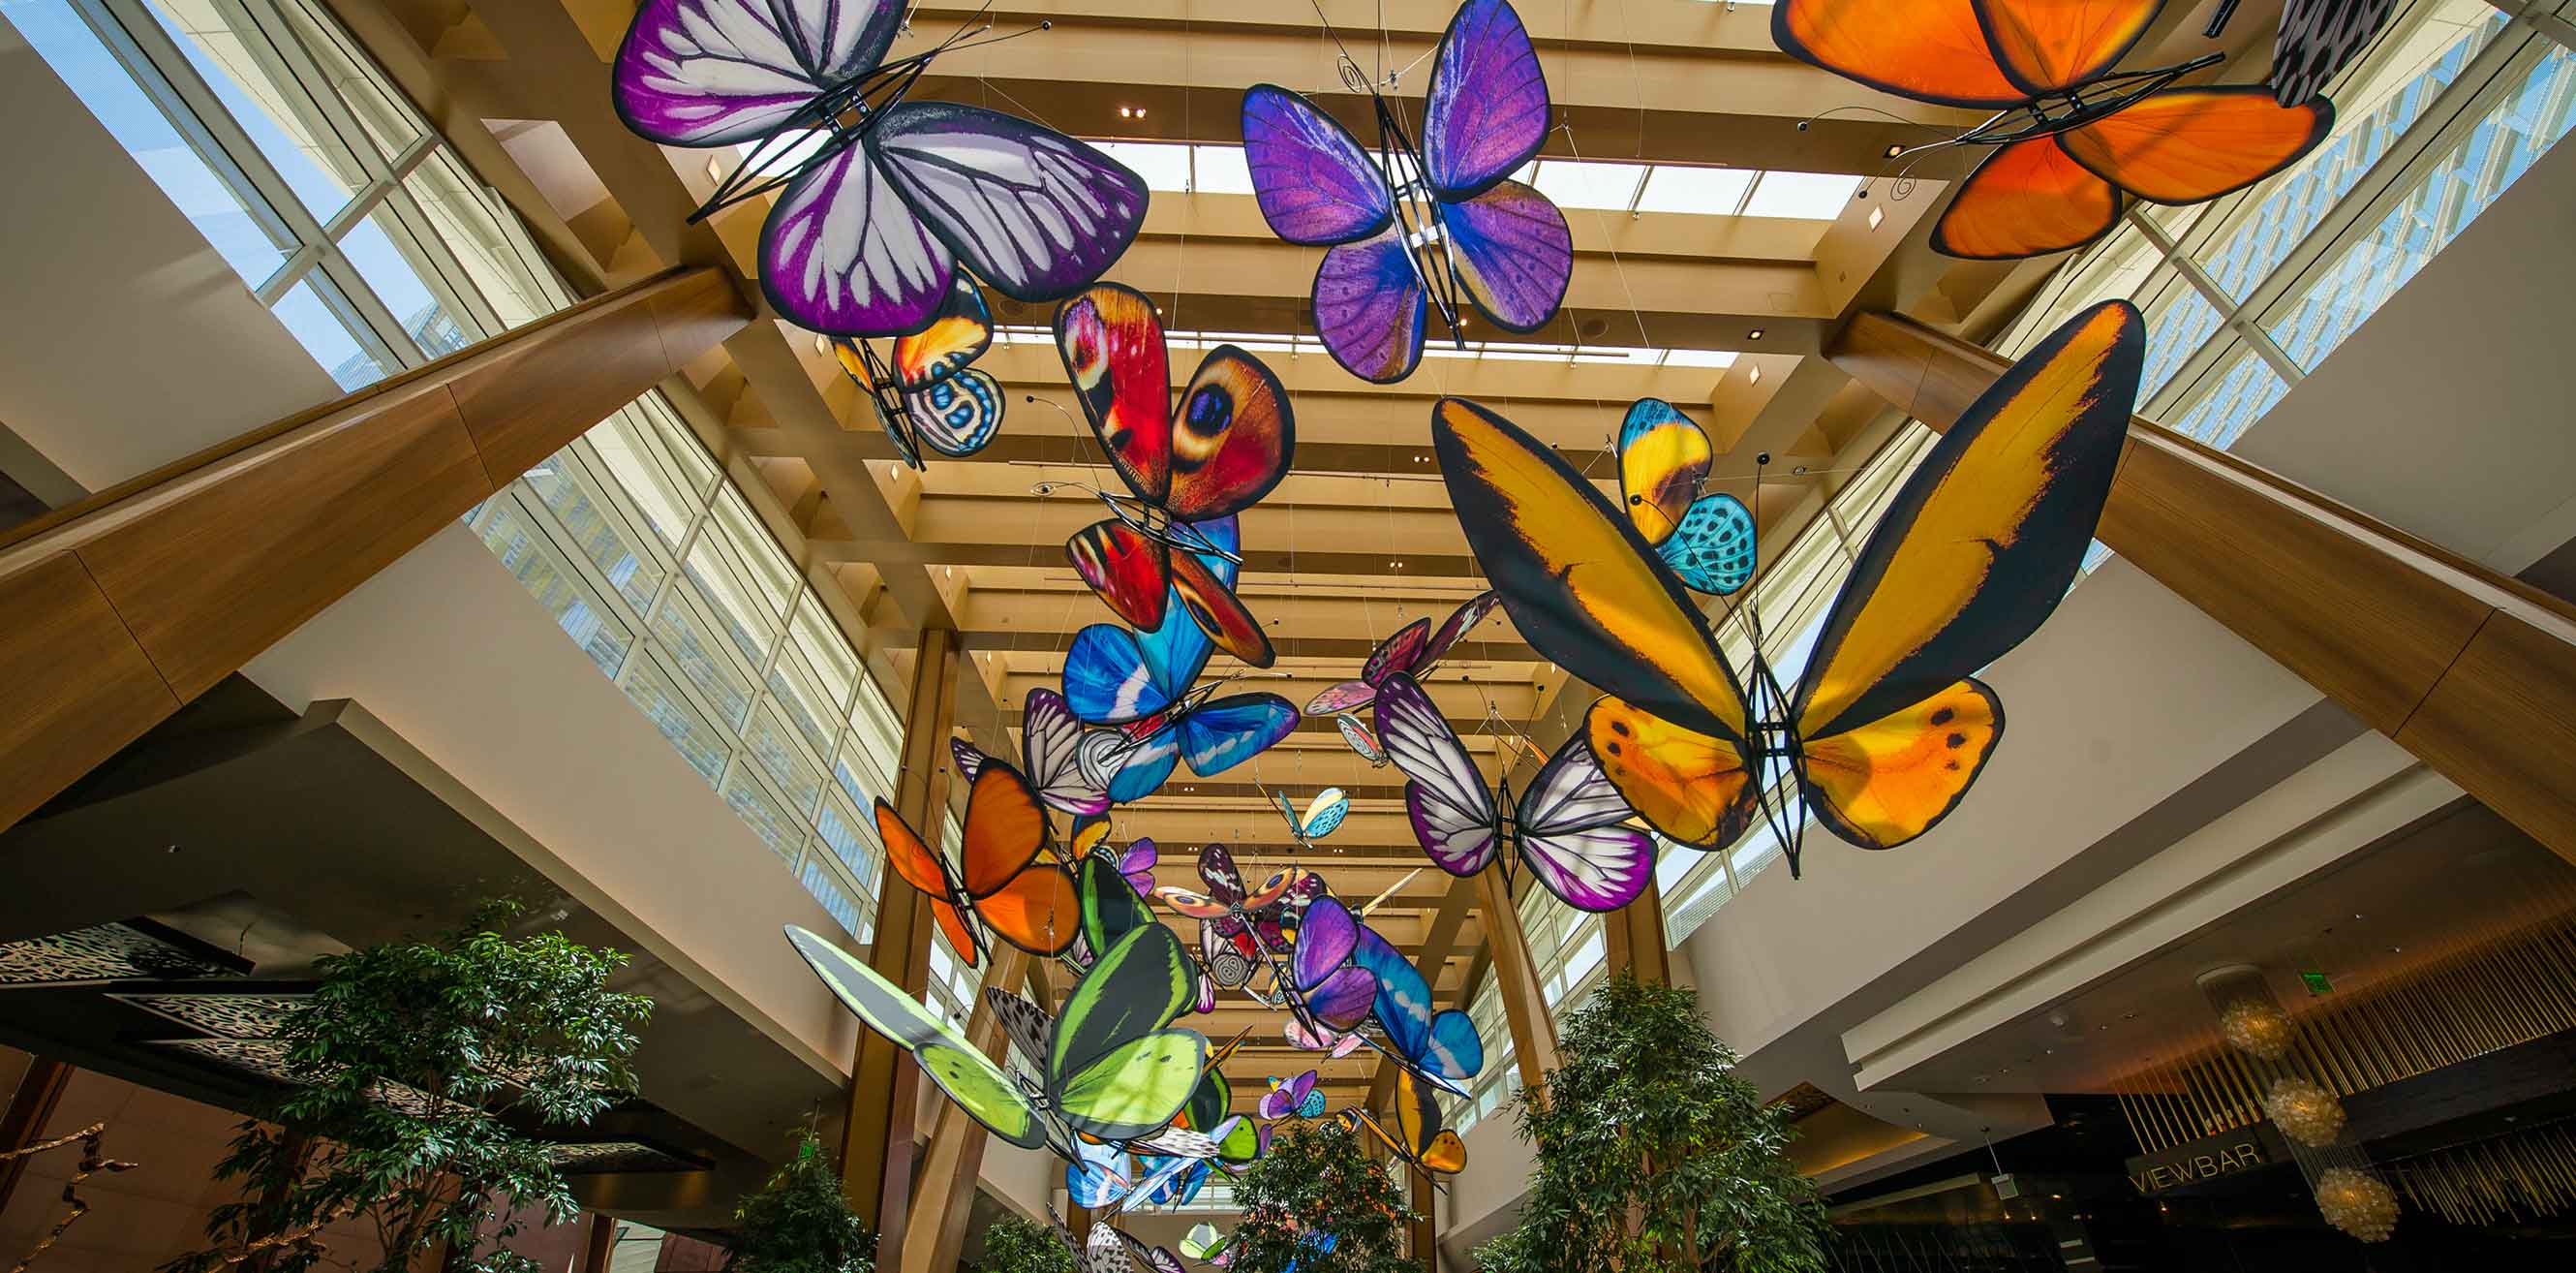 Oversized butterflies hang from the ceiling in an installation